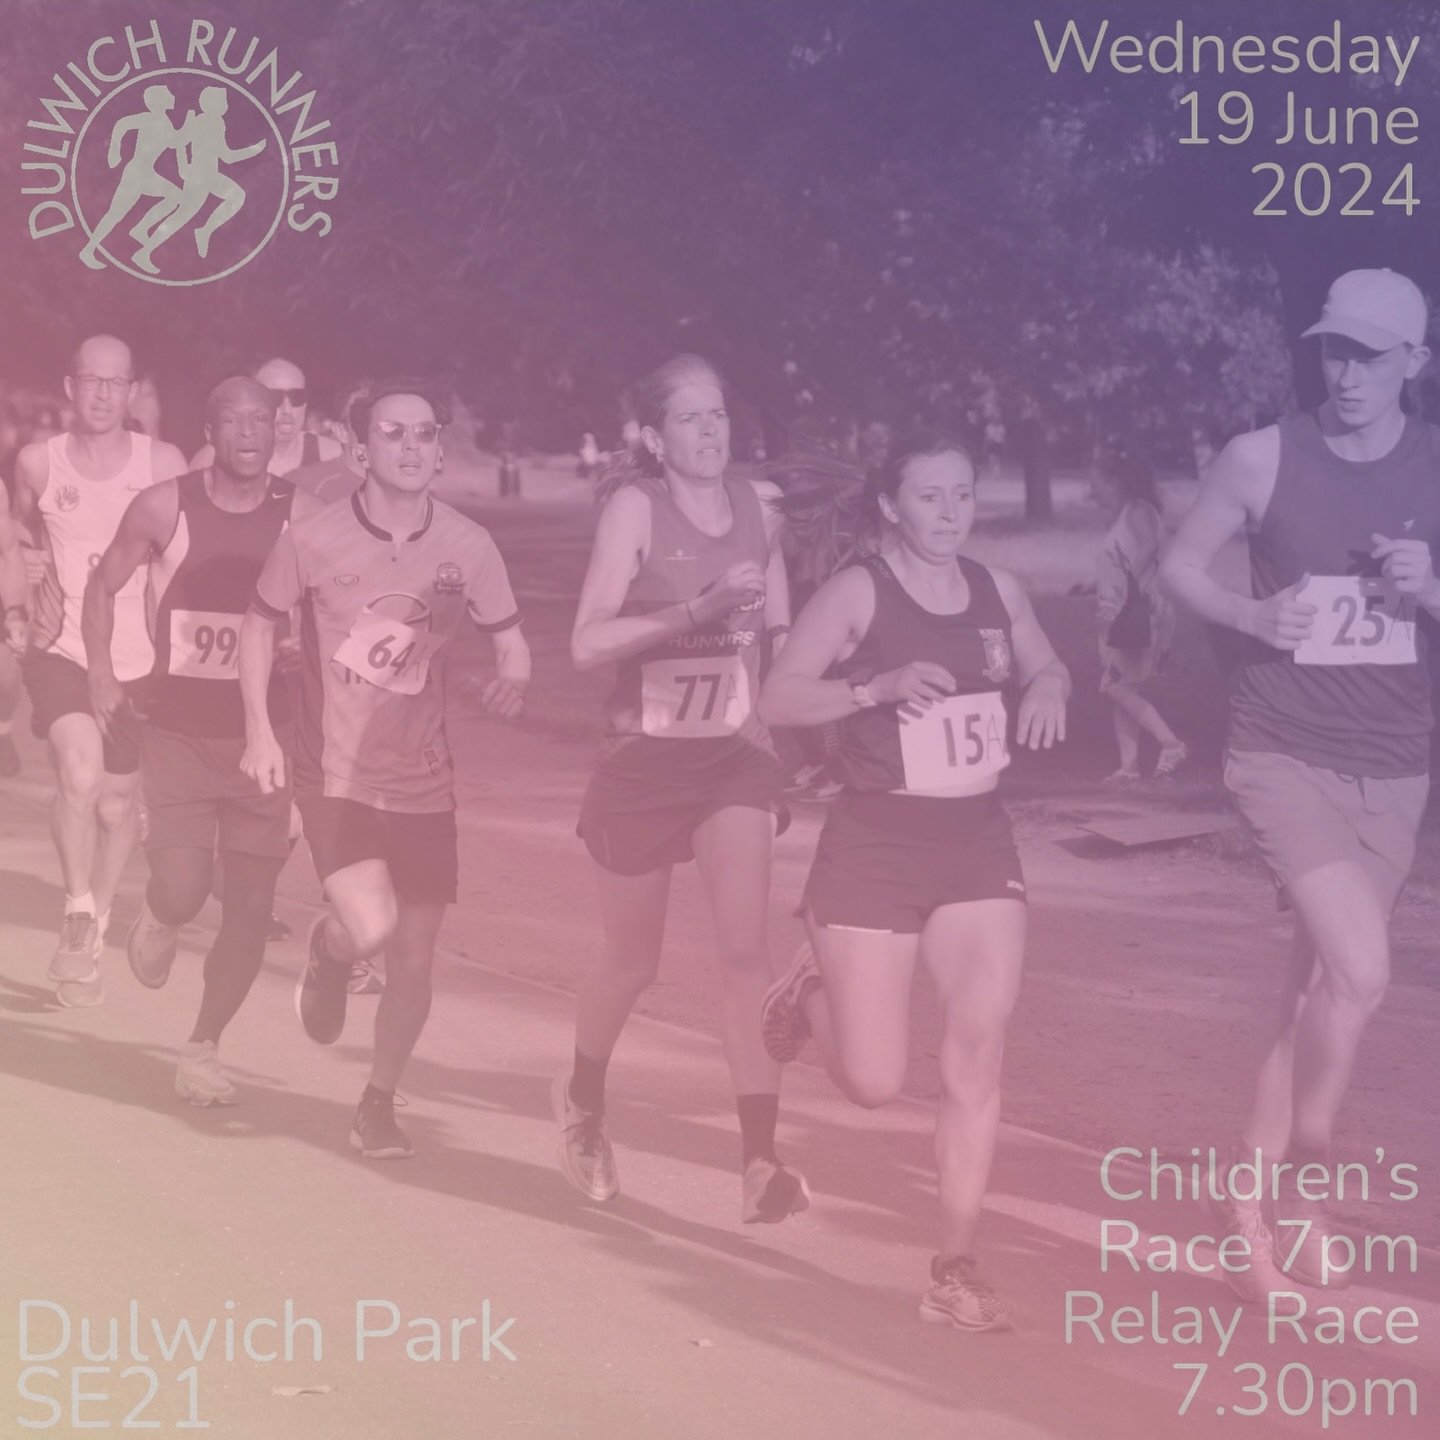 Dulwich Runners Midsummer Relays on Wednesday 19 June now open for booking on opentrack! 

https://data.opentrack.run/en-gb/x/2024/GBR/dr-midsummer-relays/

Relay race (3x 1 mile): &pound;15 in advance, &pound;18 on the day (subject to availability -